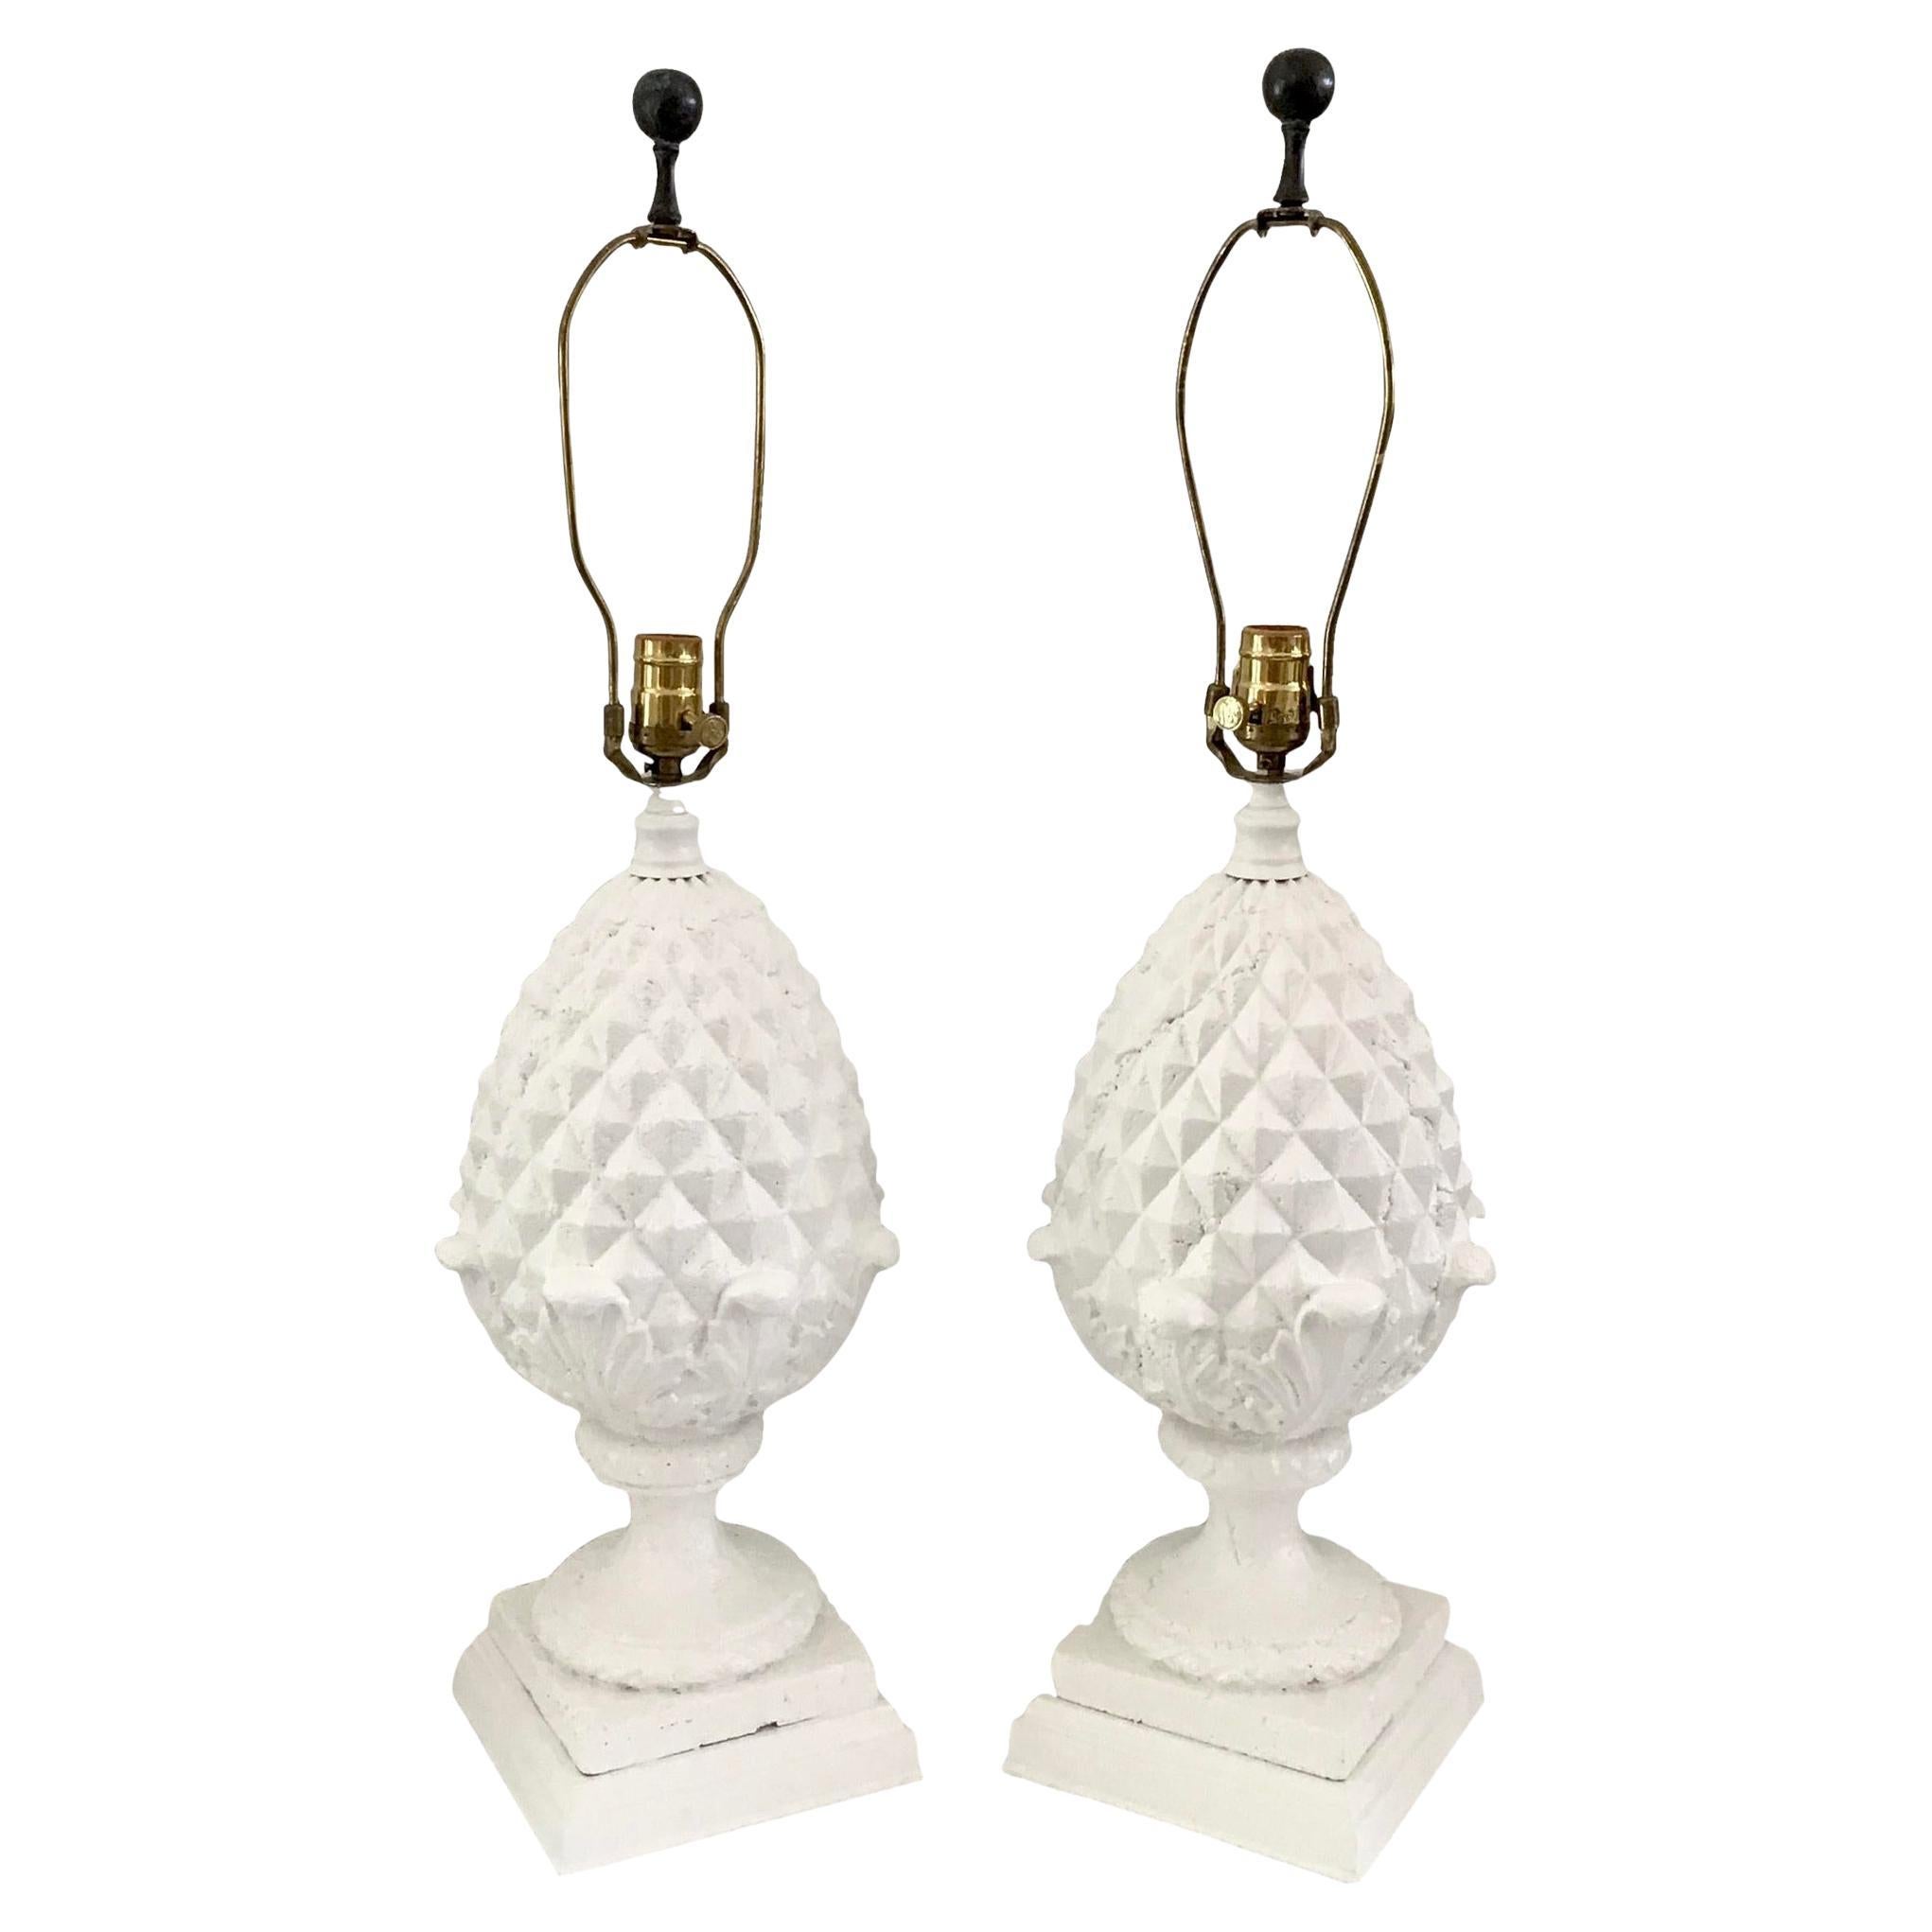 Pineapple Table Lamps in Fresh White Finish, a Pair